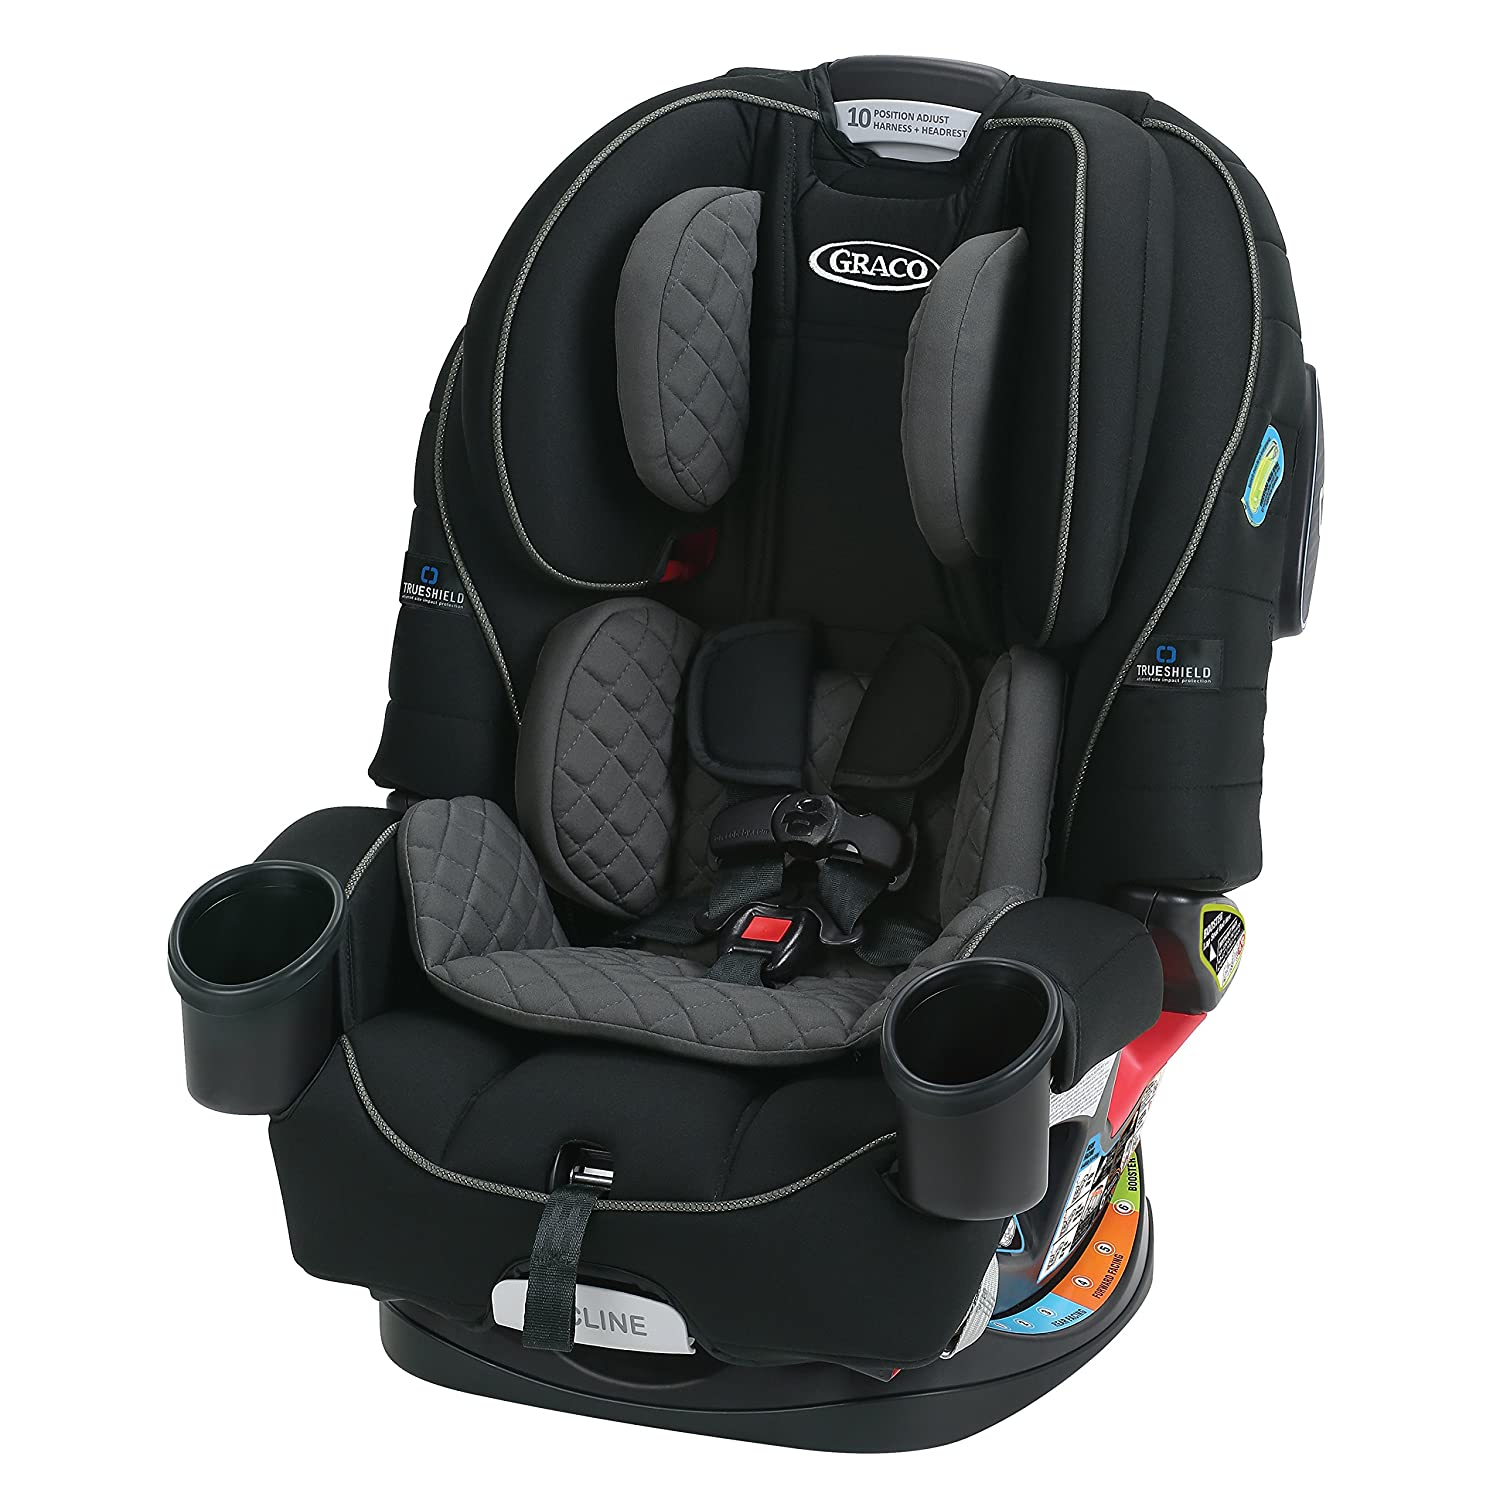 Best Car Seat For 2 Year Old Toddlers 2021 Safety Guide 